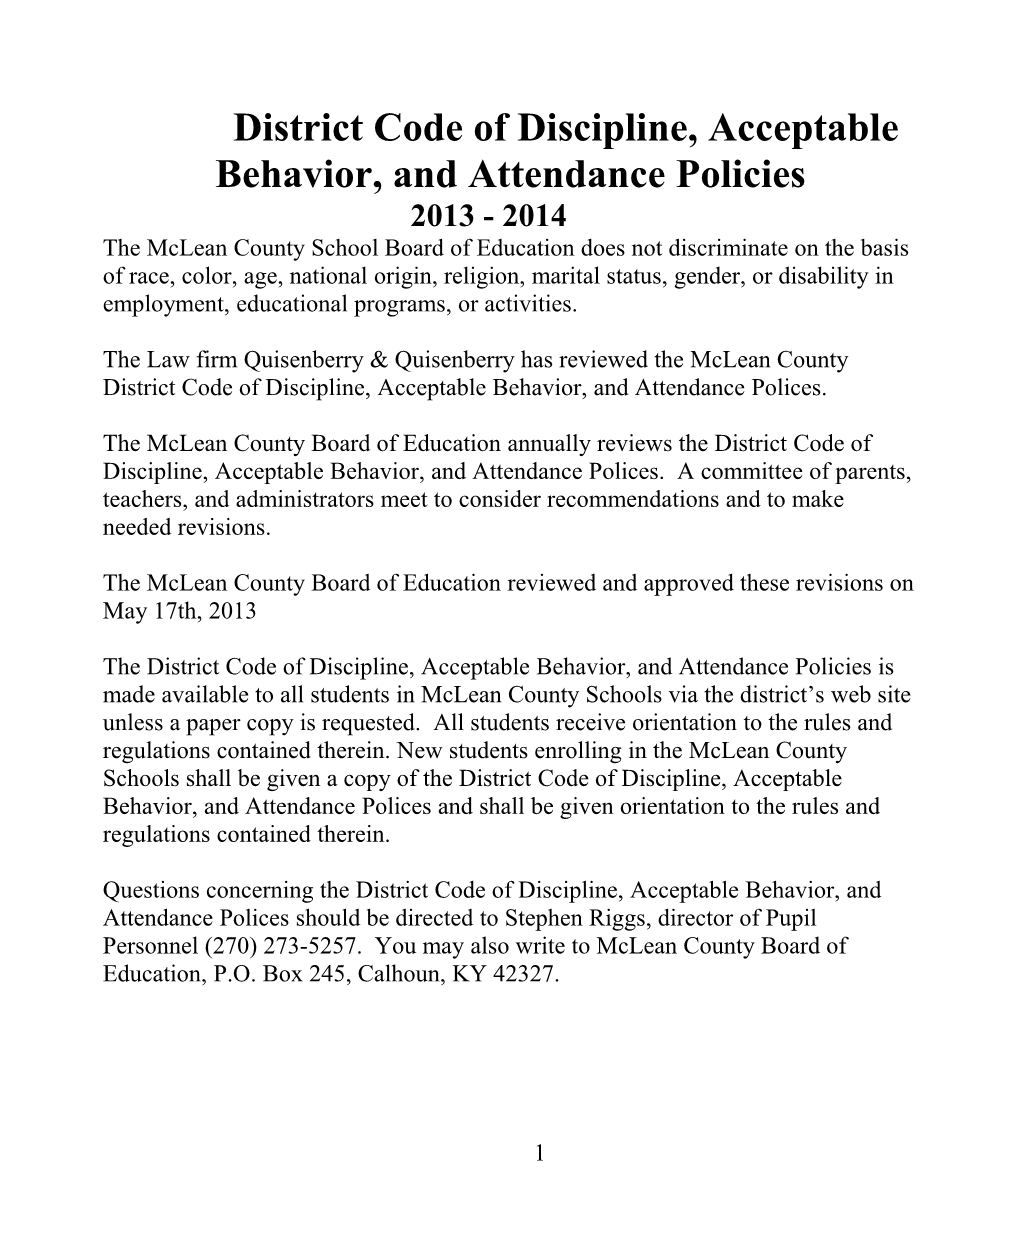 District Code of Discipline, Acceptable Behavior, and Attendance Policies